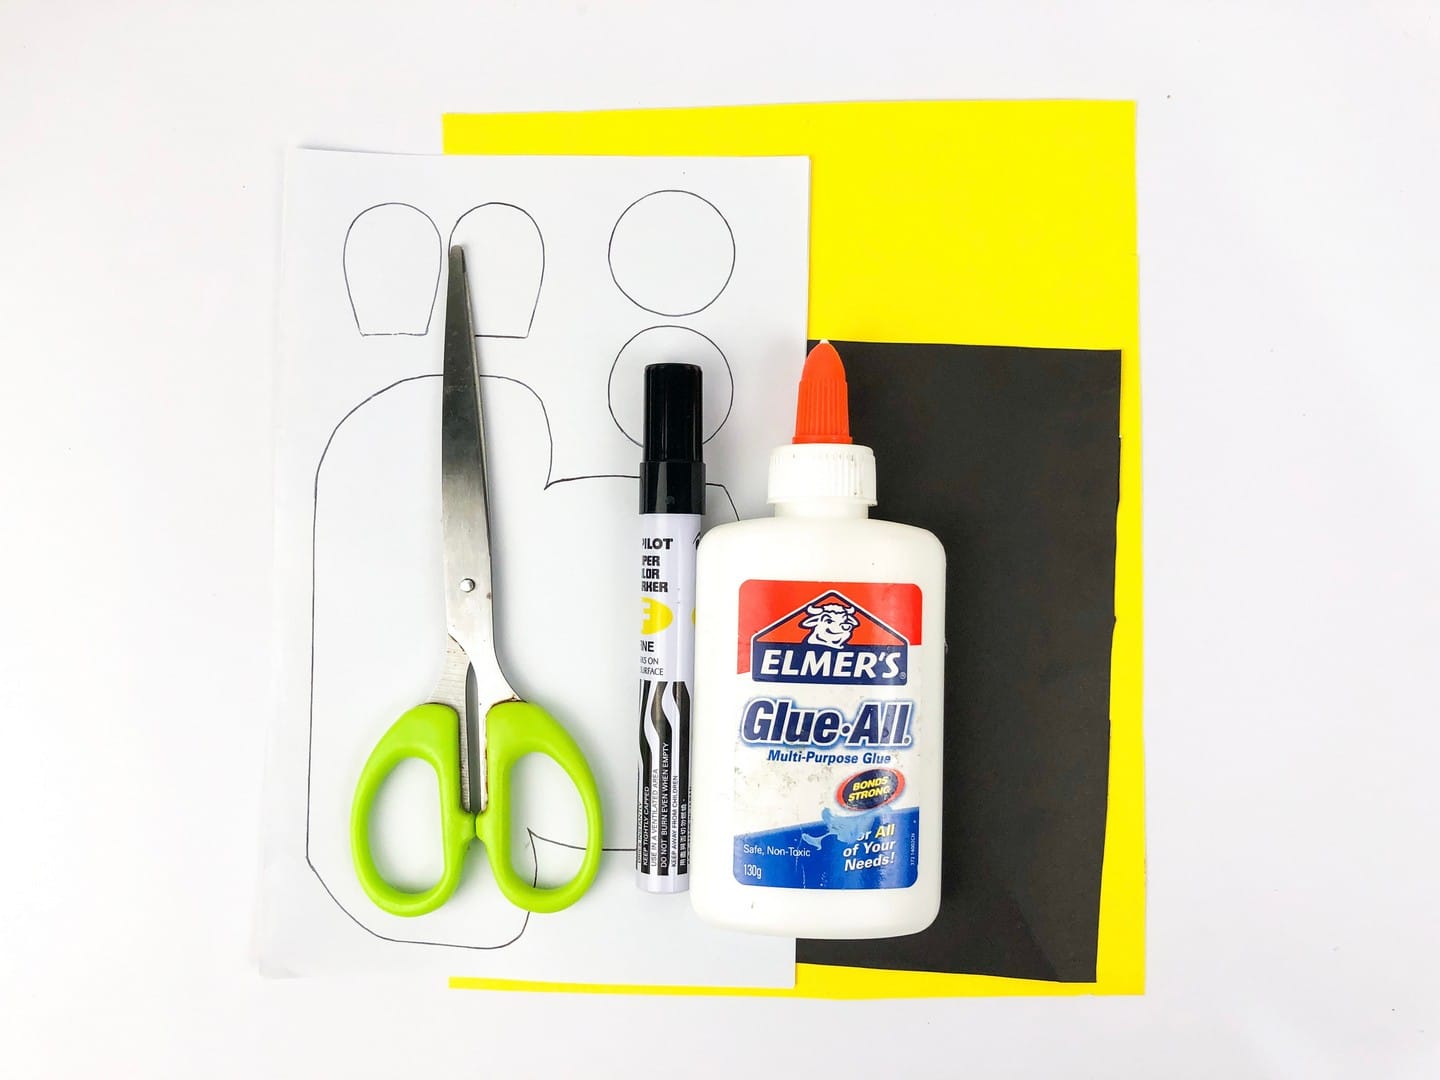 Materials needed to make card: scissors, marker, liquid glue, black, white, and yellow paper. 